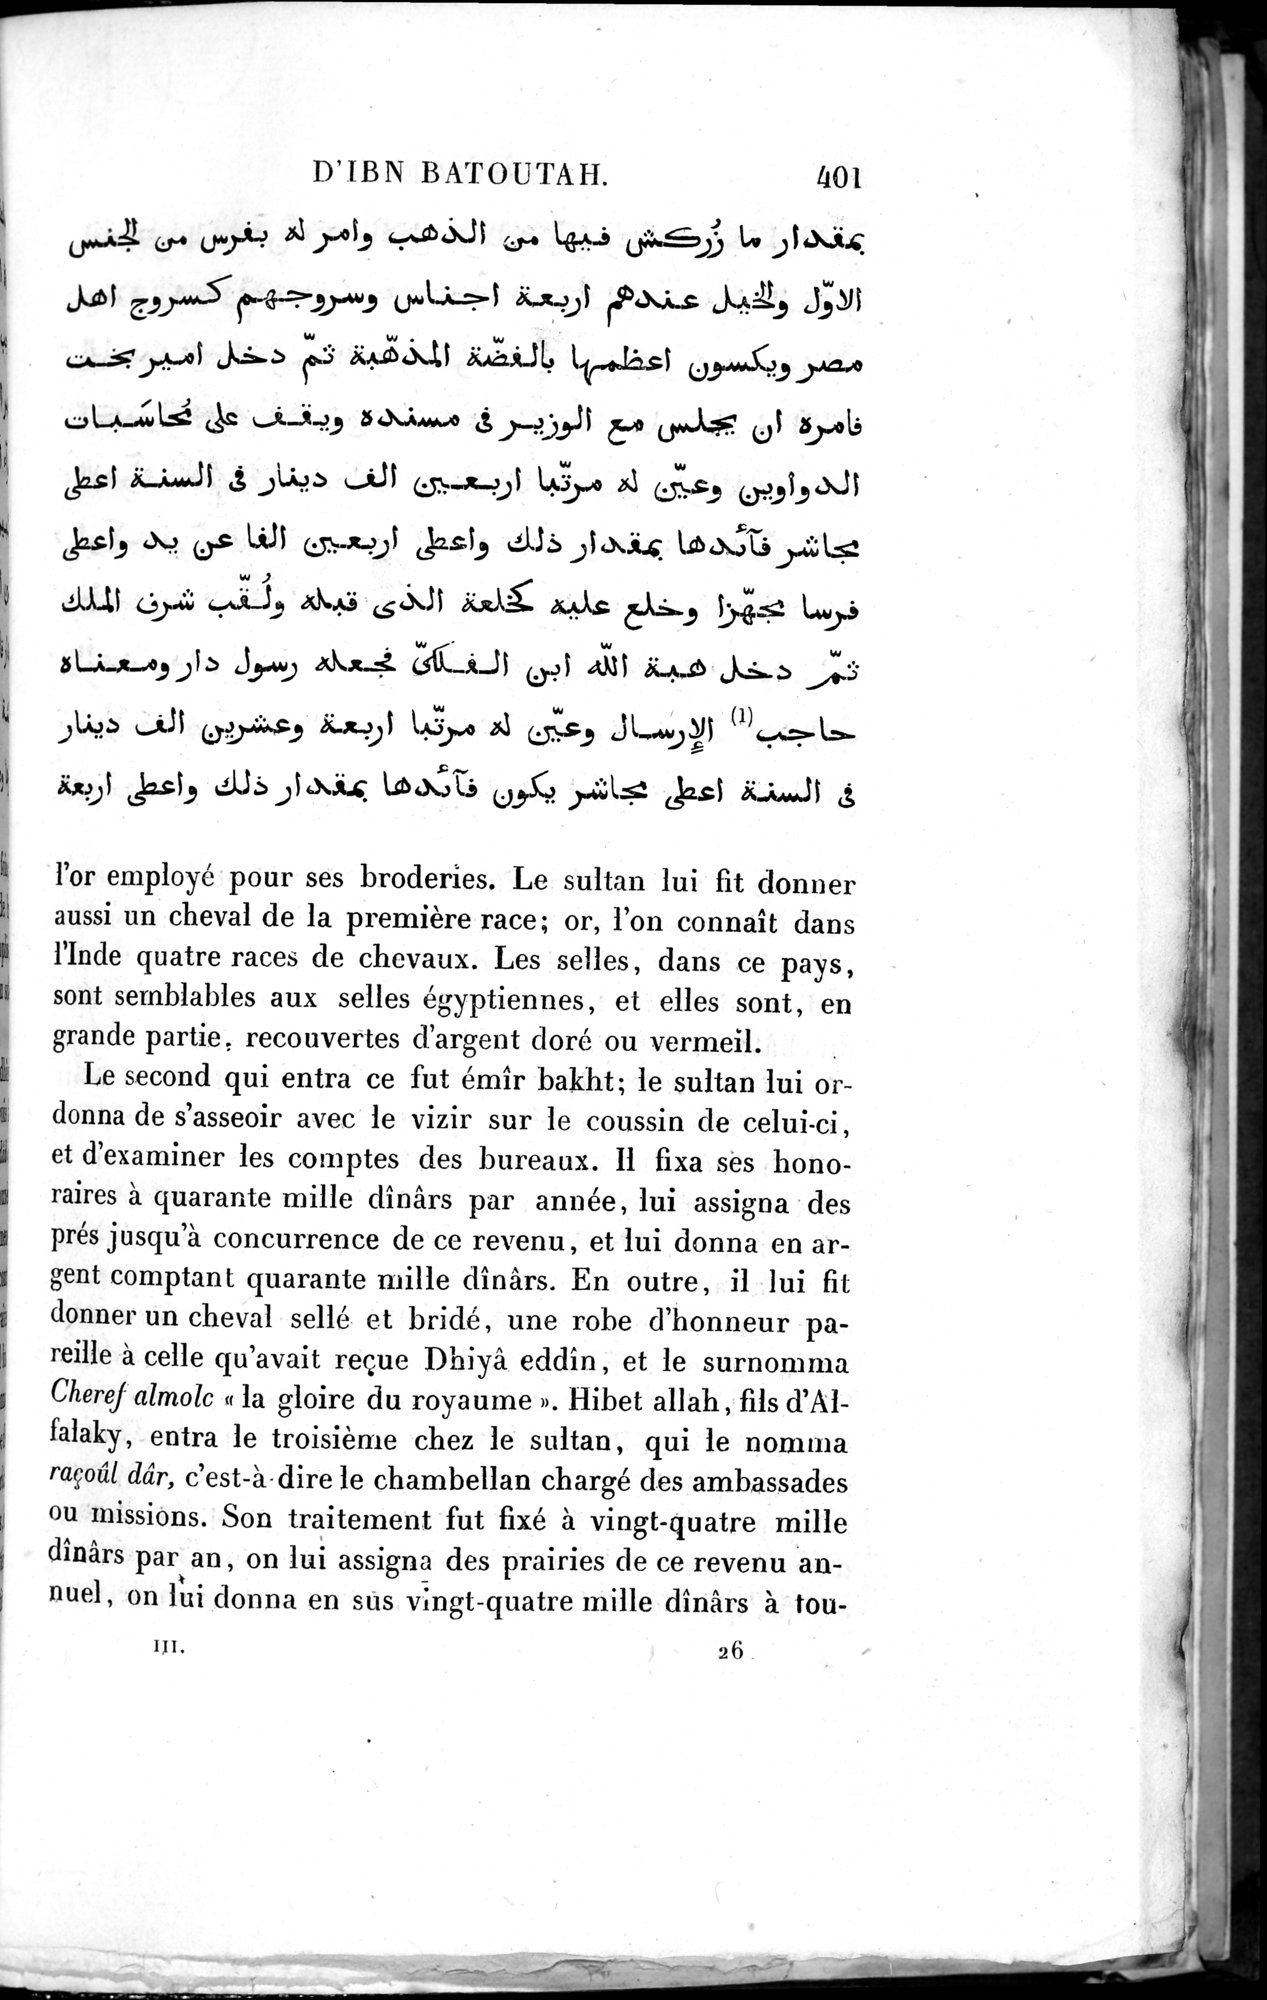 Voyages d'Ibn Batoutah : vol.3 / Page 441 (Grayscale High Resolution Image)